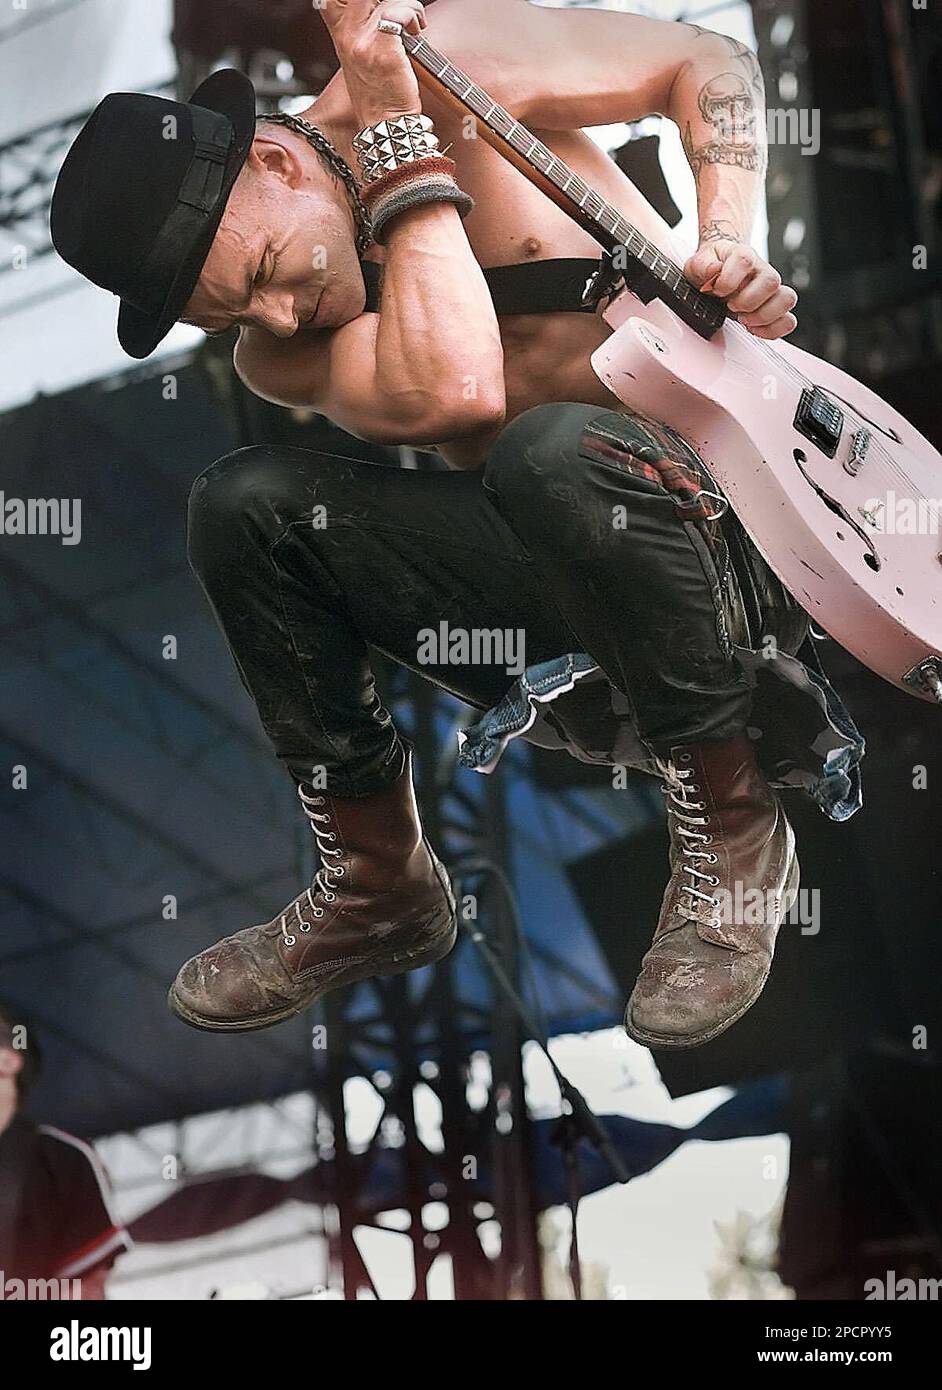 **ADVANCE FOR SUNDAY, JULY 30**FILE** Rancid lead singer Tim Armstrong jumps while playing at Lollapalooza concert in Des Moines, Iowa, in this June 28, 1996, file photo. It's been 15 years since the first version of the festival toured 21 cities, with a hiatus from 1997 until 2003. The festival is now back after a successful one-destination-only weekend version last year in Chicago. The 2006 three-day affair, from Aug. 4 to 6, will feature 130 musical acts on nine stages once again in Chicago. (AP Photo/Kevin Wolf) Stock Photo